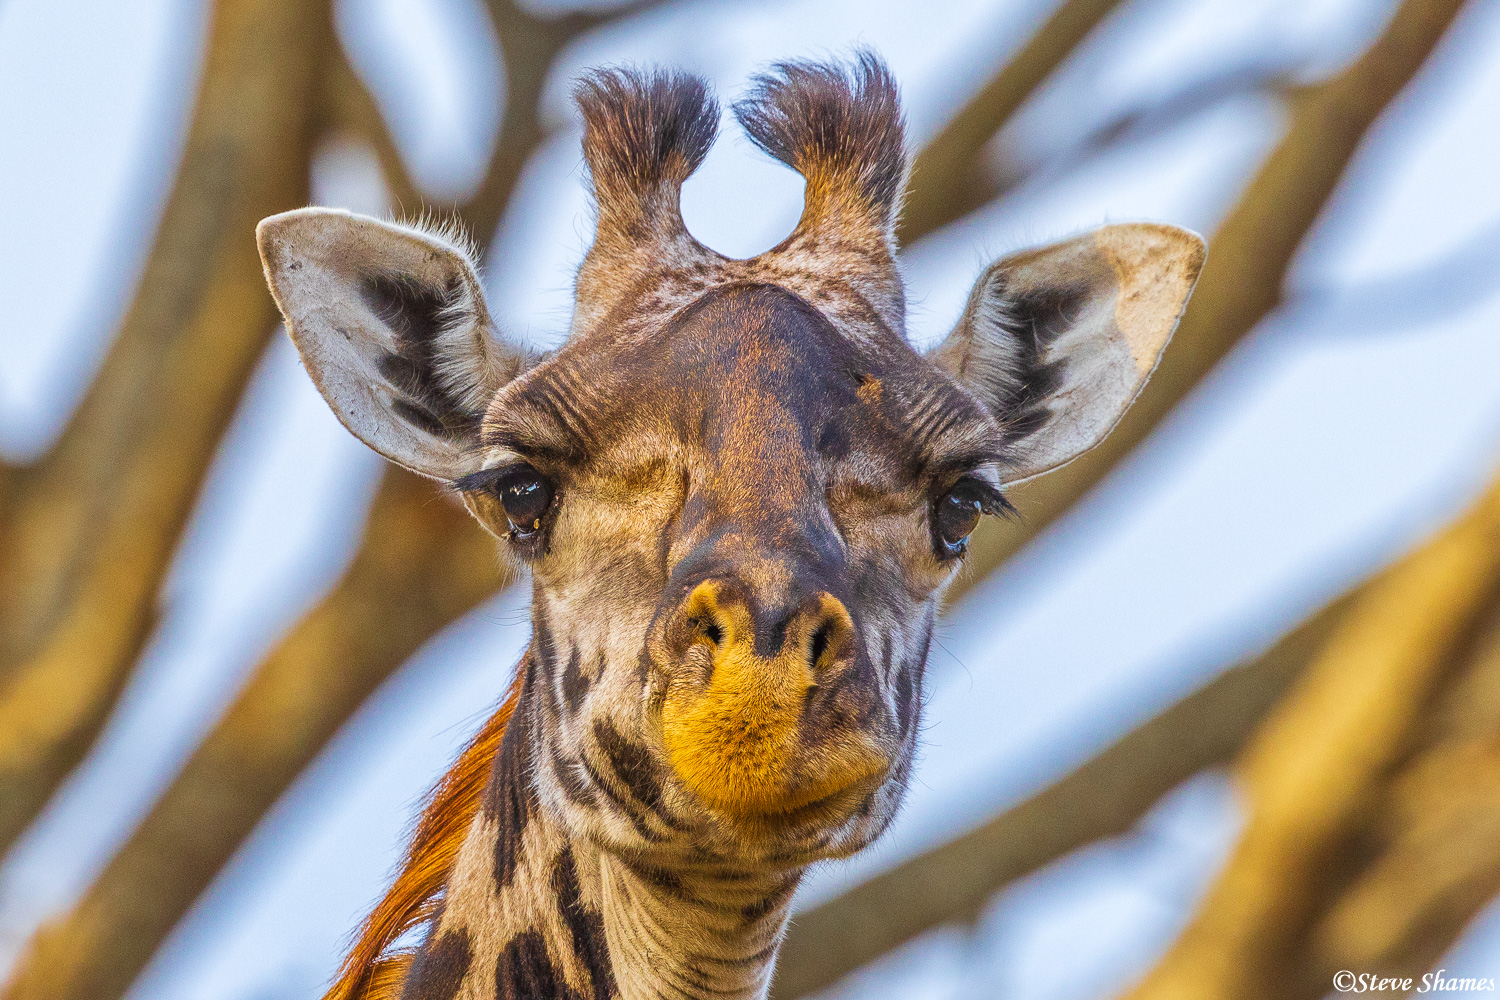 Here is a portrait of a giraffe. They have such a unique look.